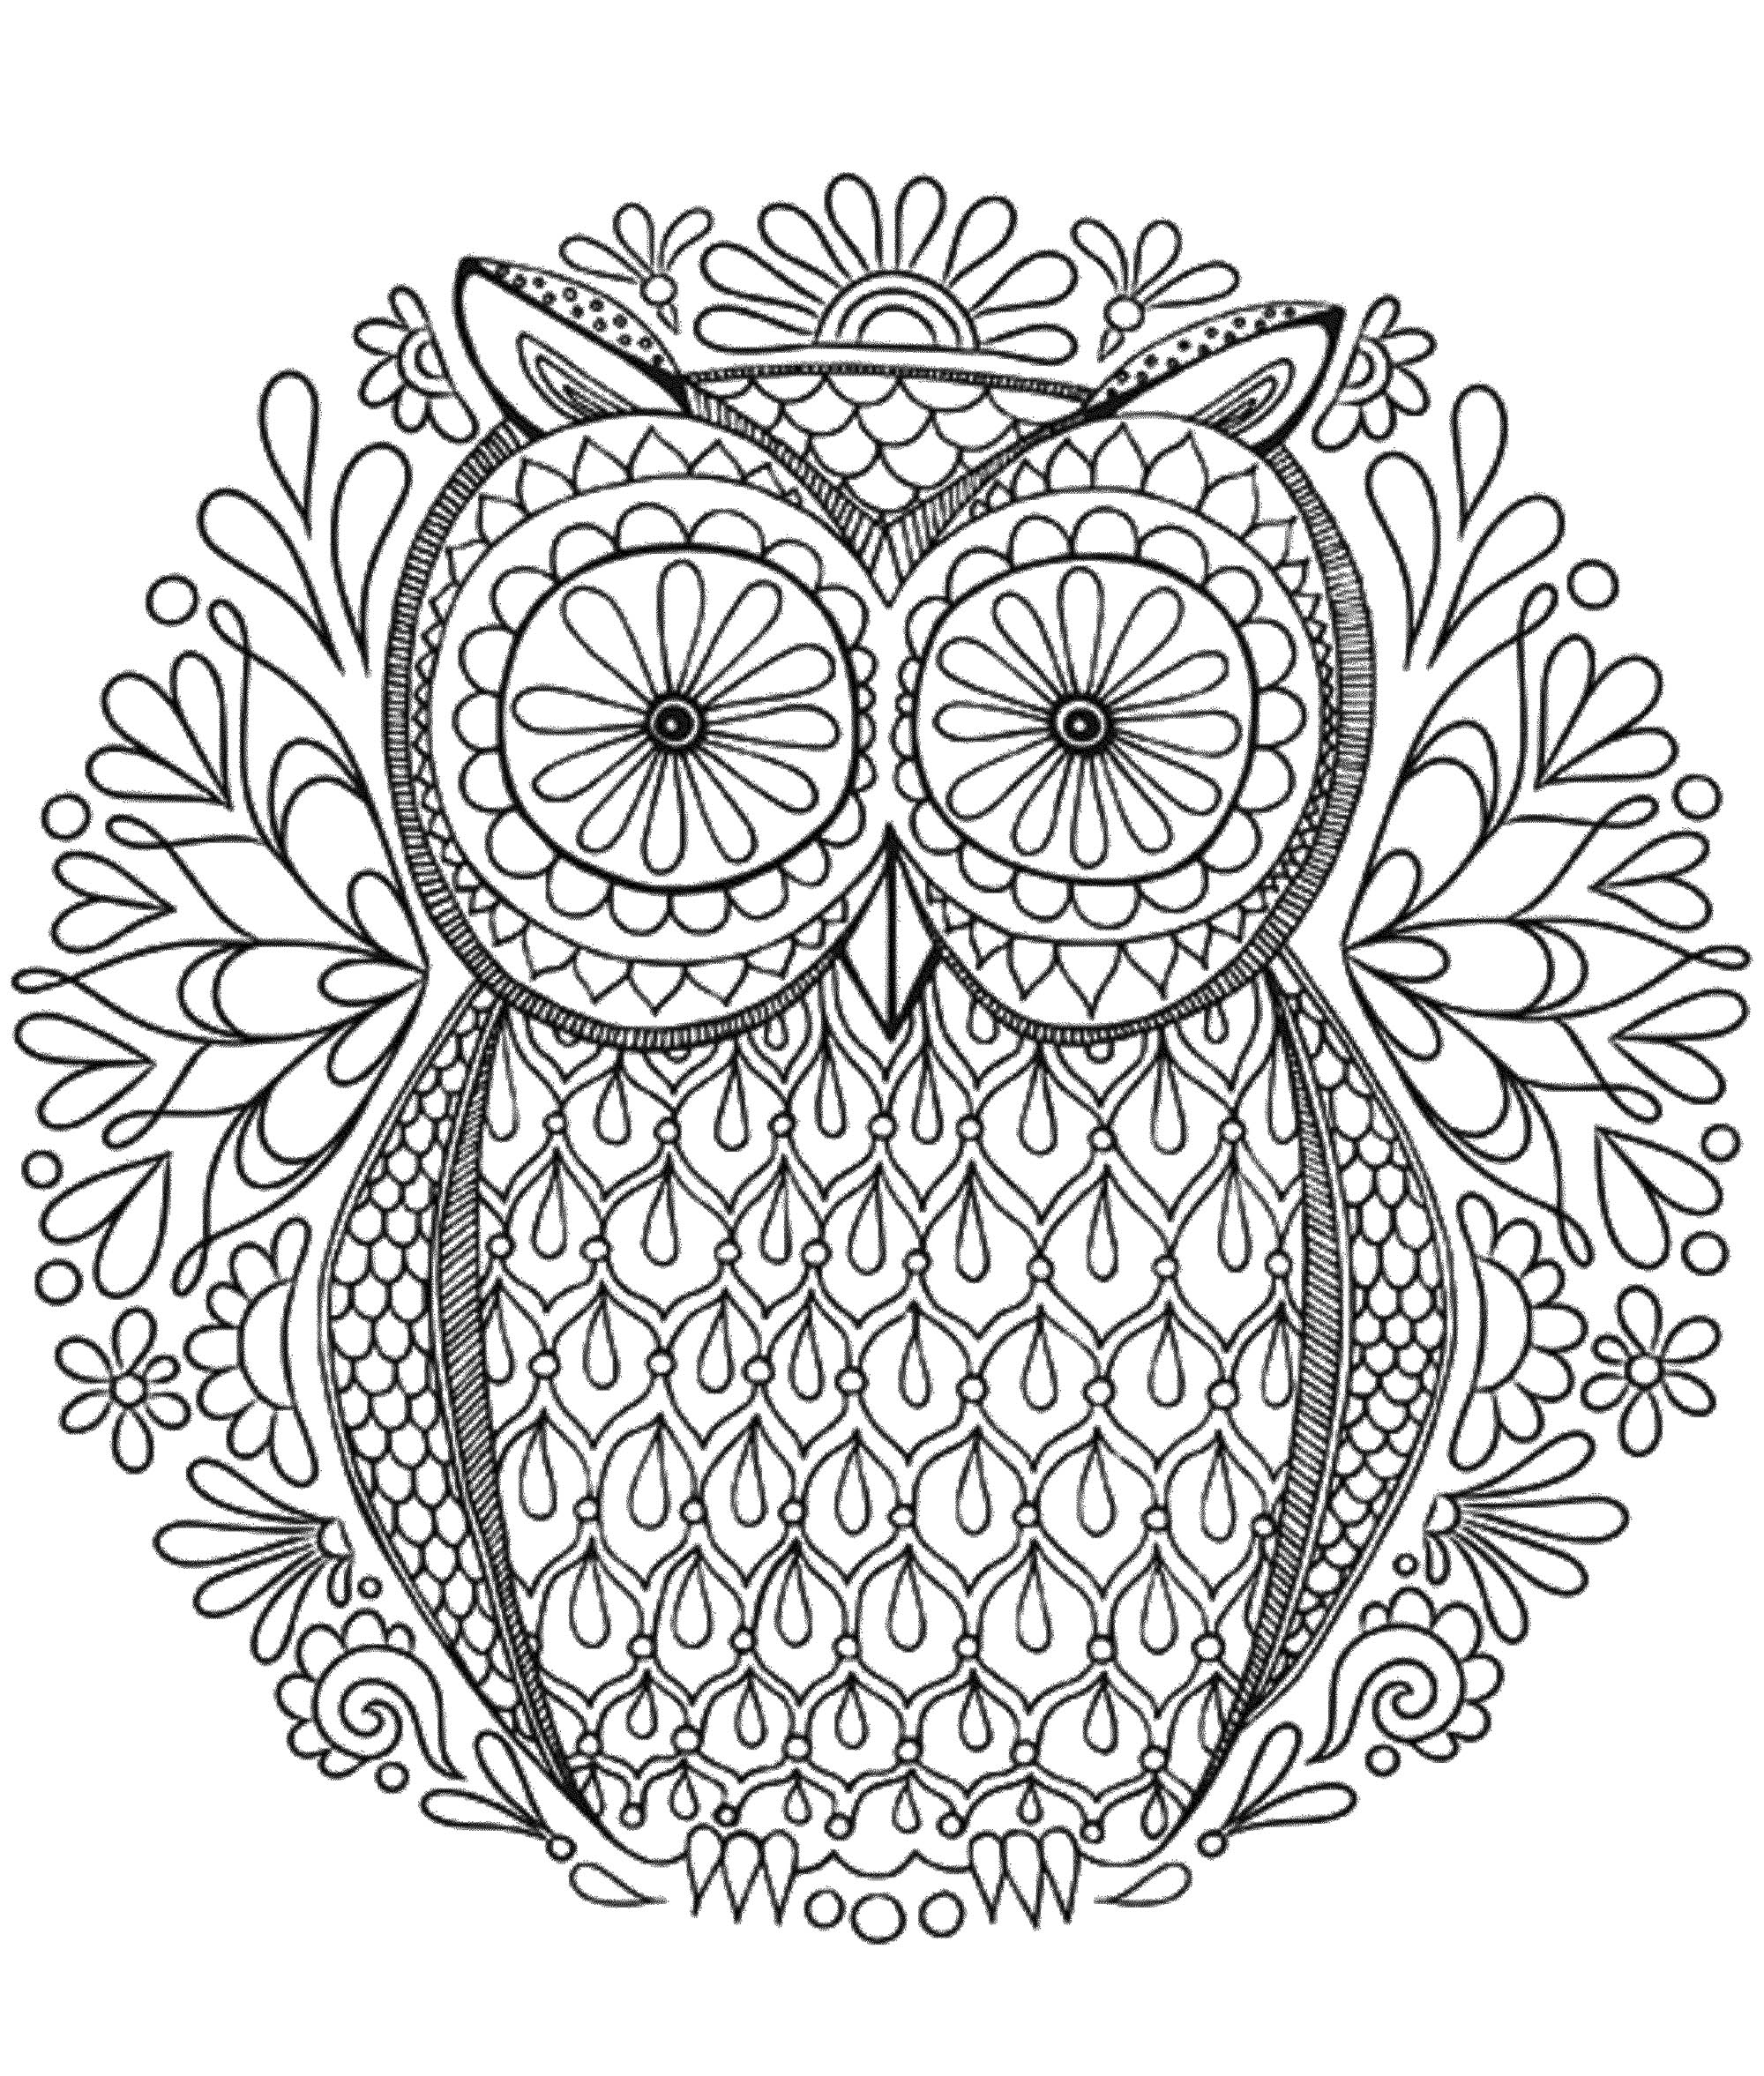 Mandala To Download In Pdf 6 M alas Adult Coloring Pages